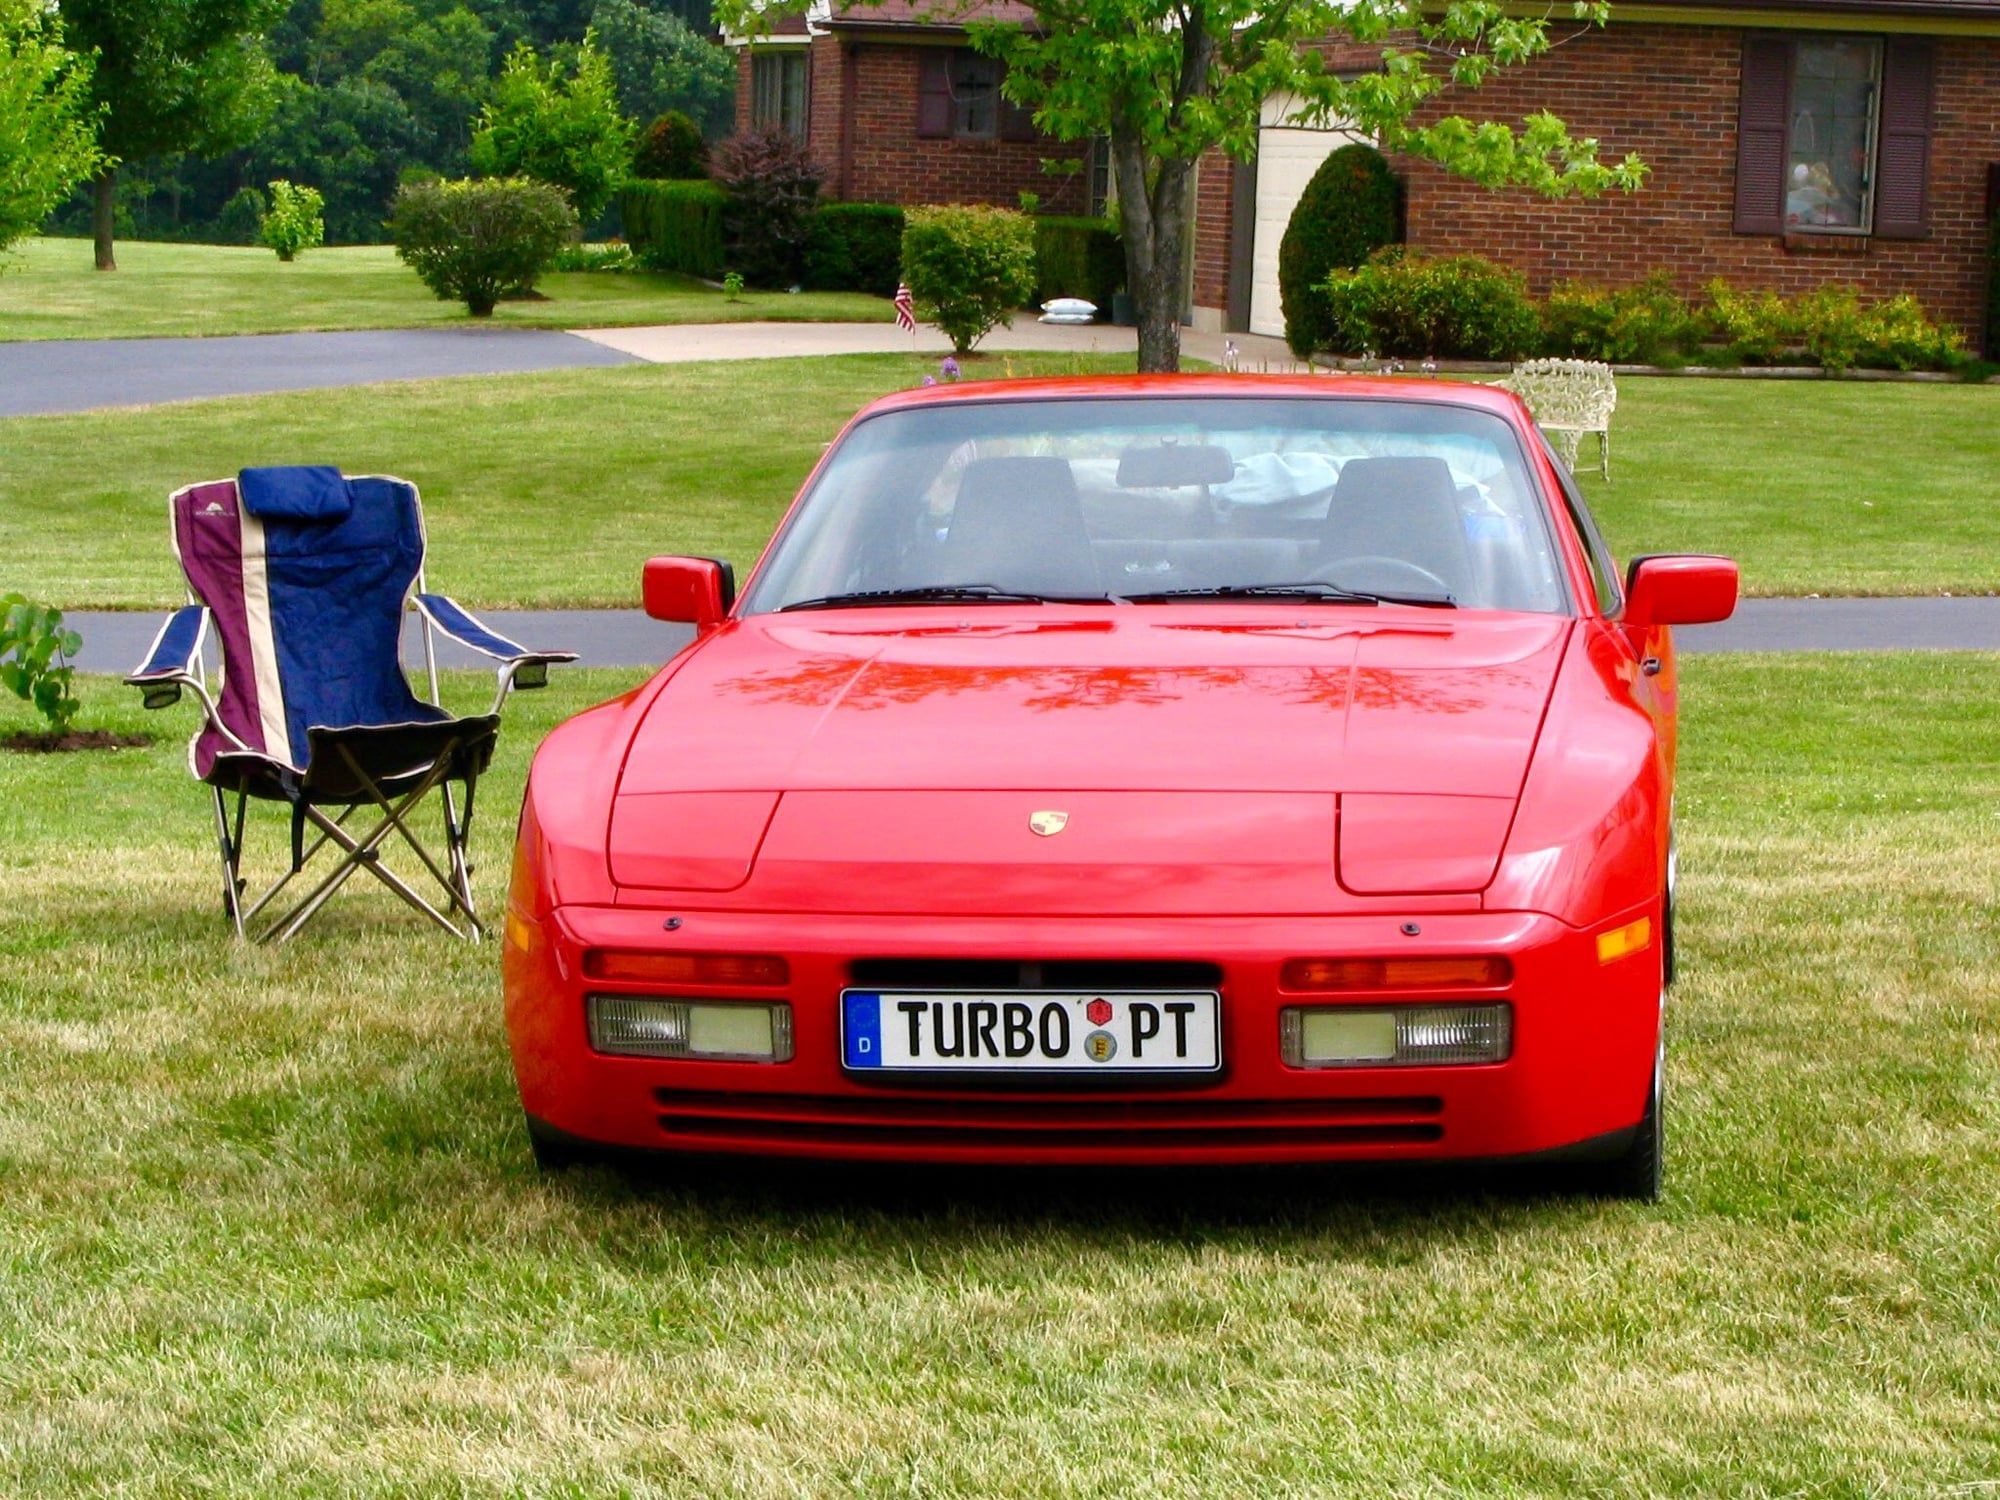 1989 Porsche 944 -  - Used - VIN Guards Red/Black - 4 cyl - Manual - Coupe - Red - Eau Claire, MI 49111, United States